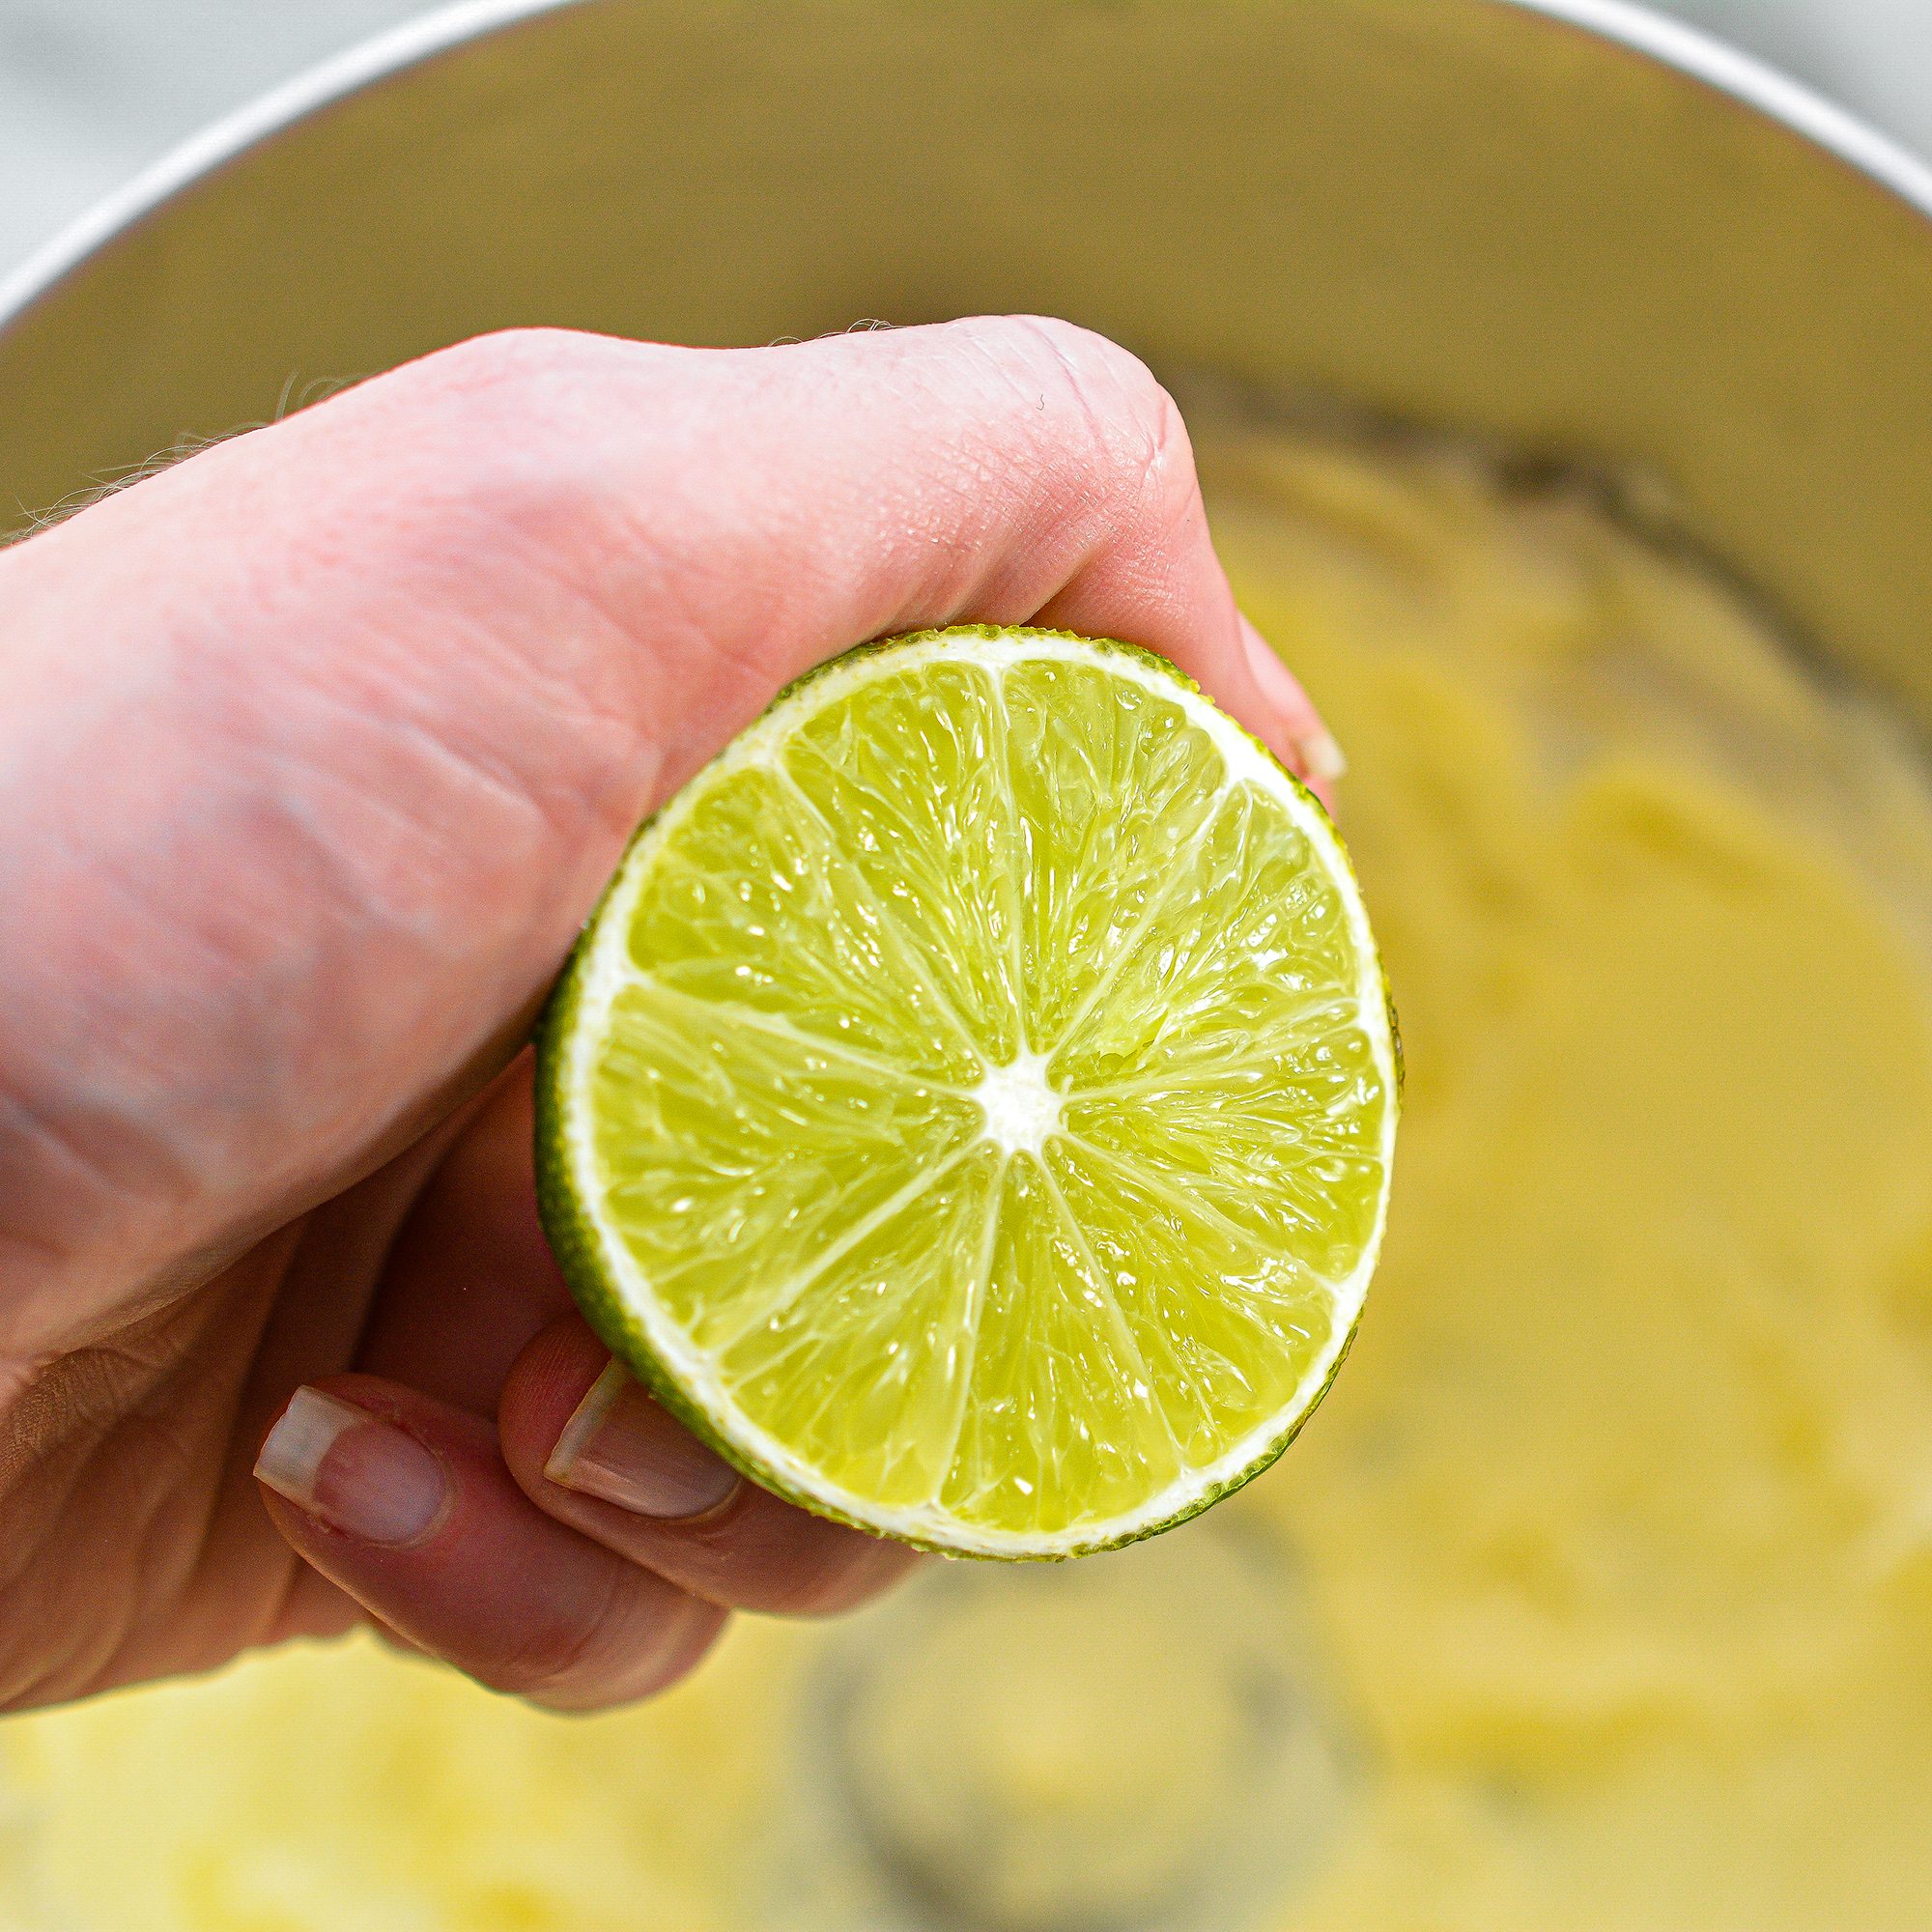 Place the lime juice, zest, and confectioners sugar for the icing to the mixing bowl, and beat until a smooth and creamy icing has formed.